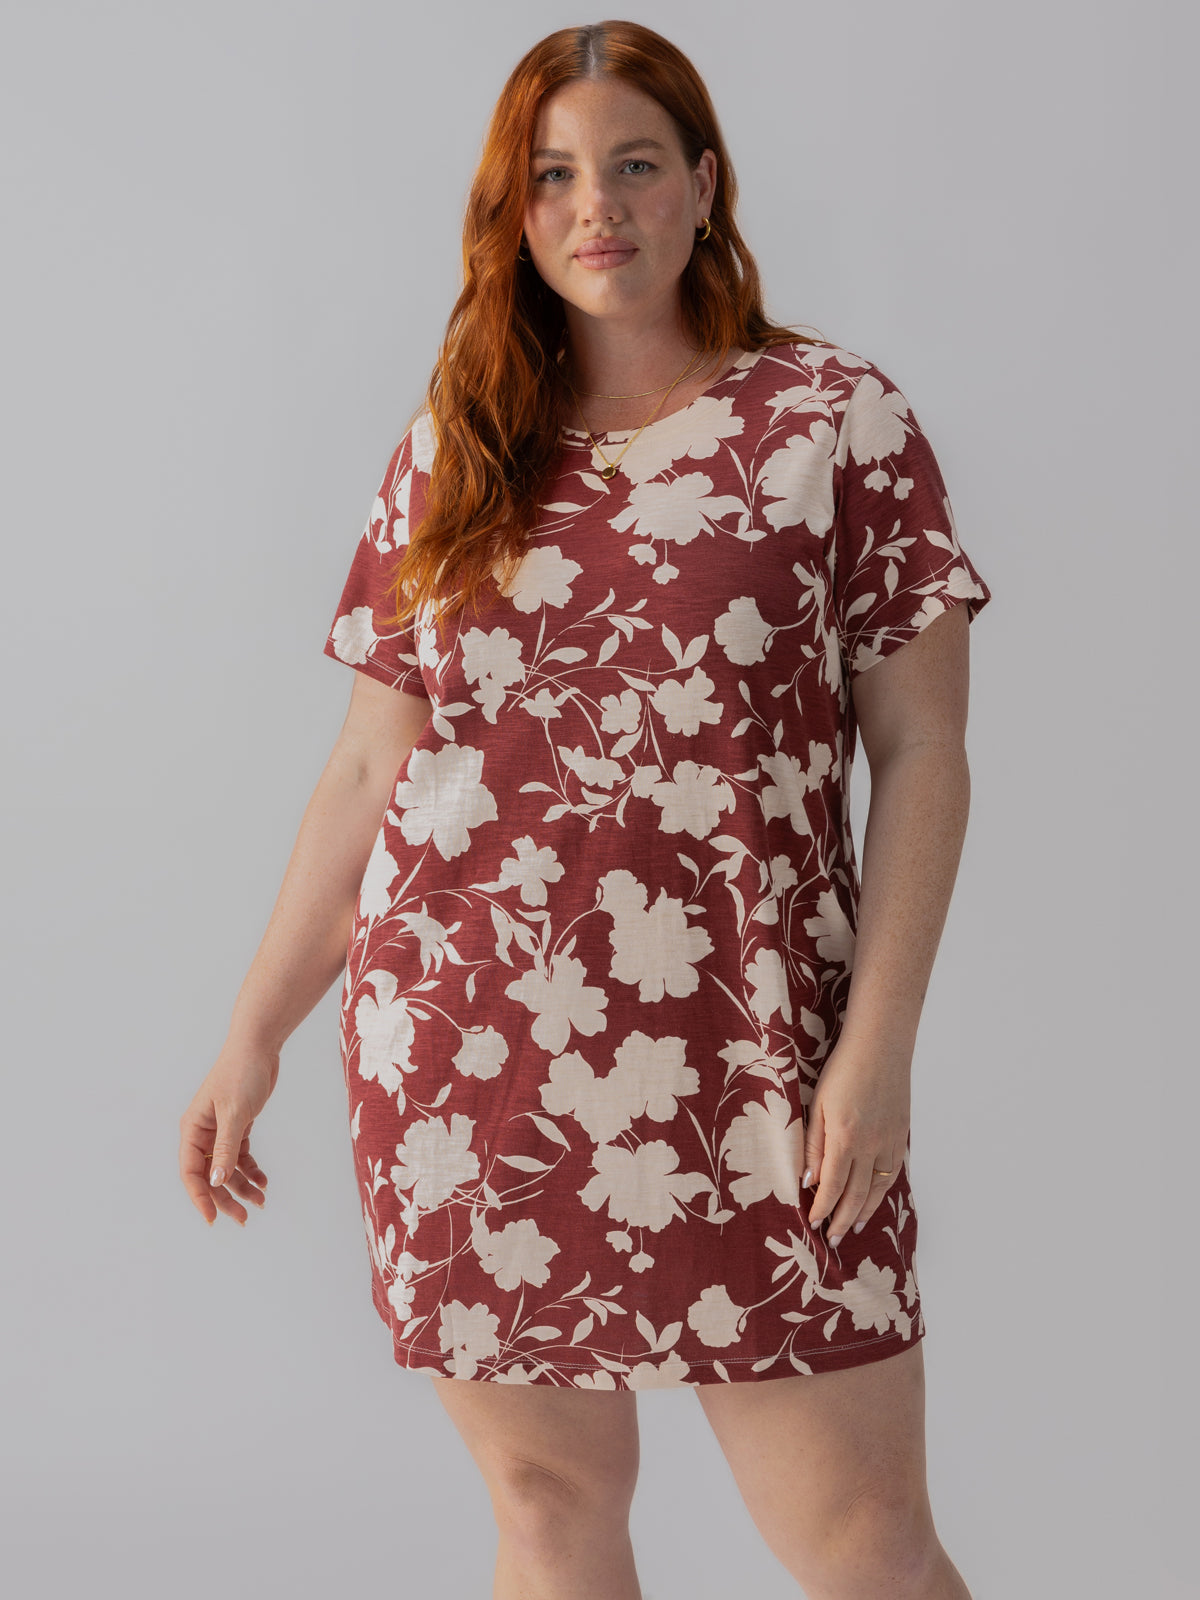 The Only One T-Shirt Dress Warm Vista Inclusive Collection